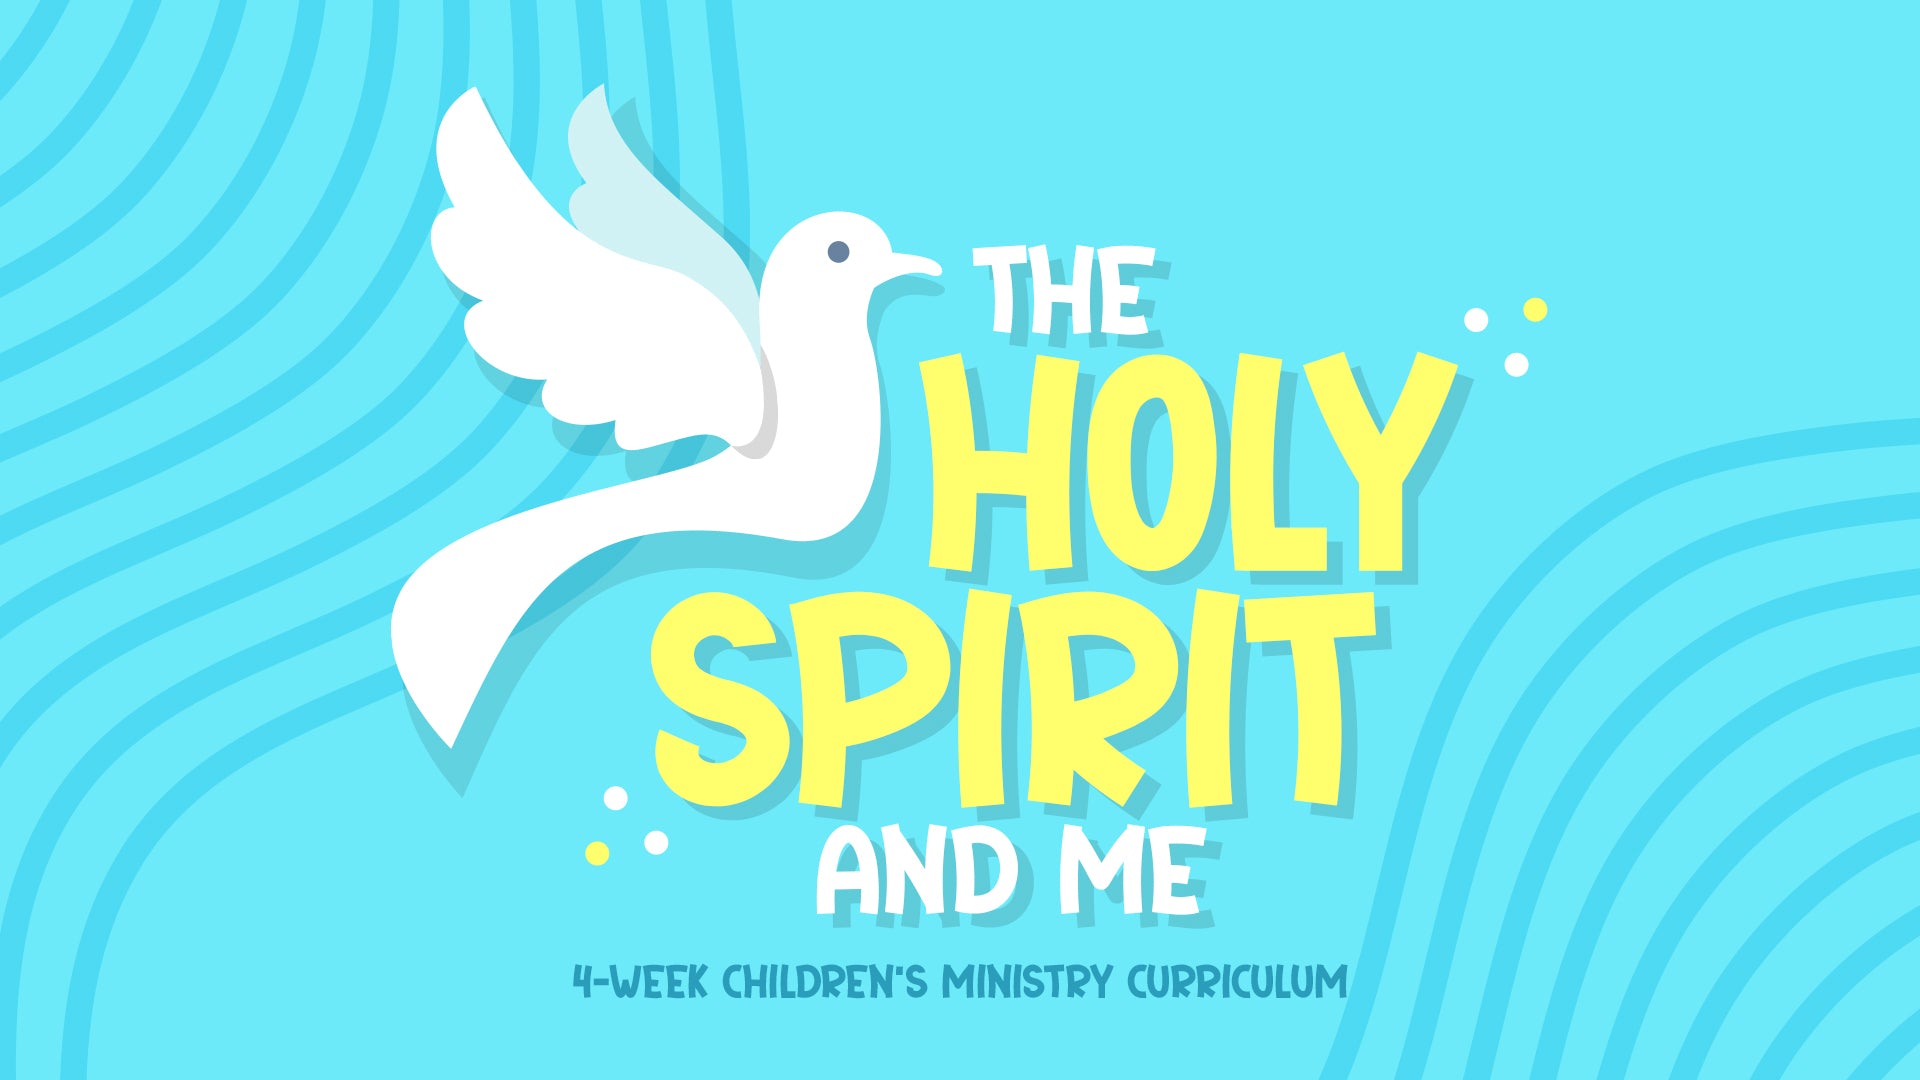 Image of The Holy Spirit and Me: 4-Week Children's Ministry Curriculum